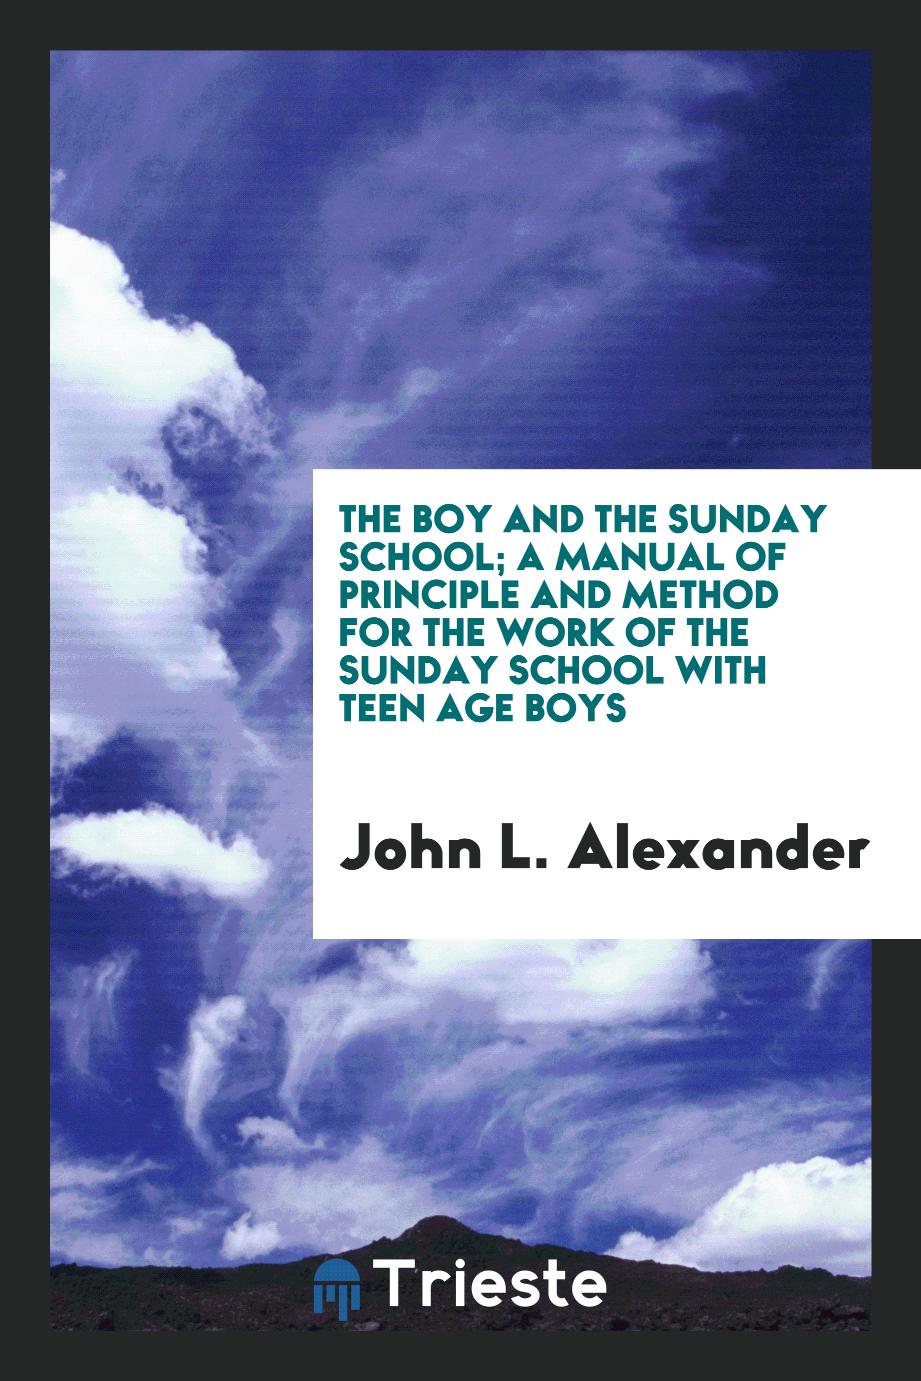 The boy and the Sunday school; a manual of principle and method for the work of the Sunday school with teen age boys